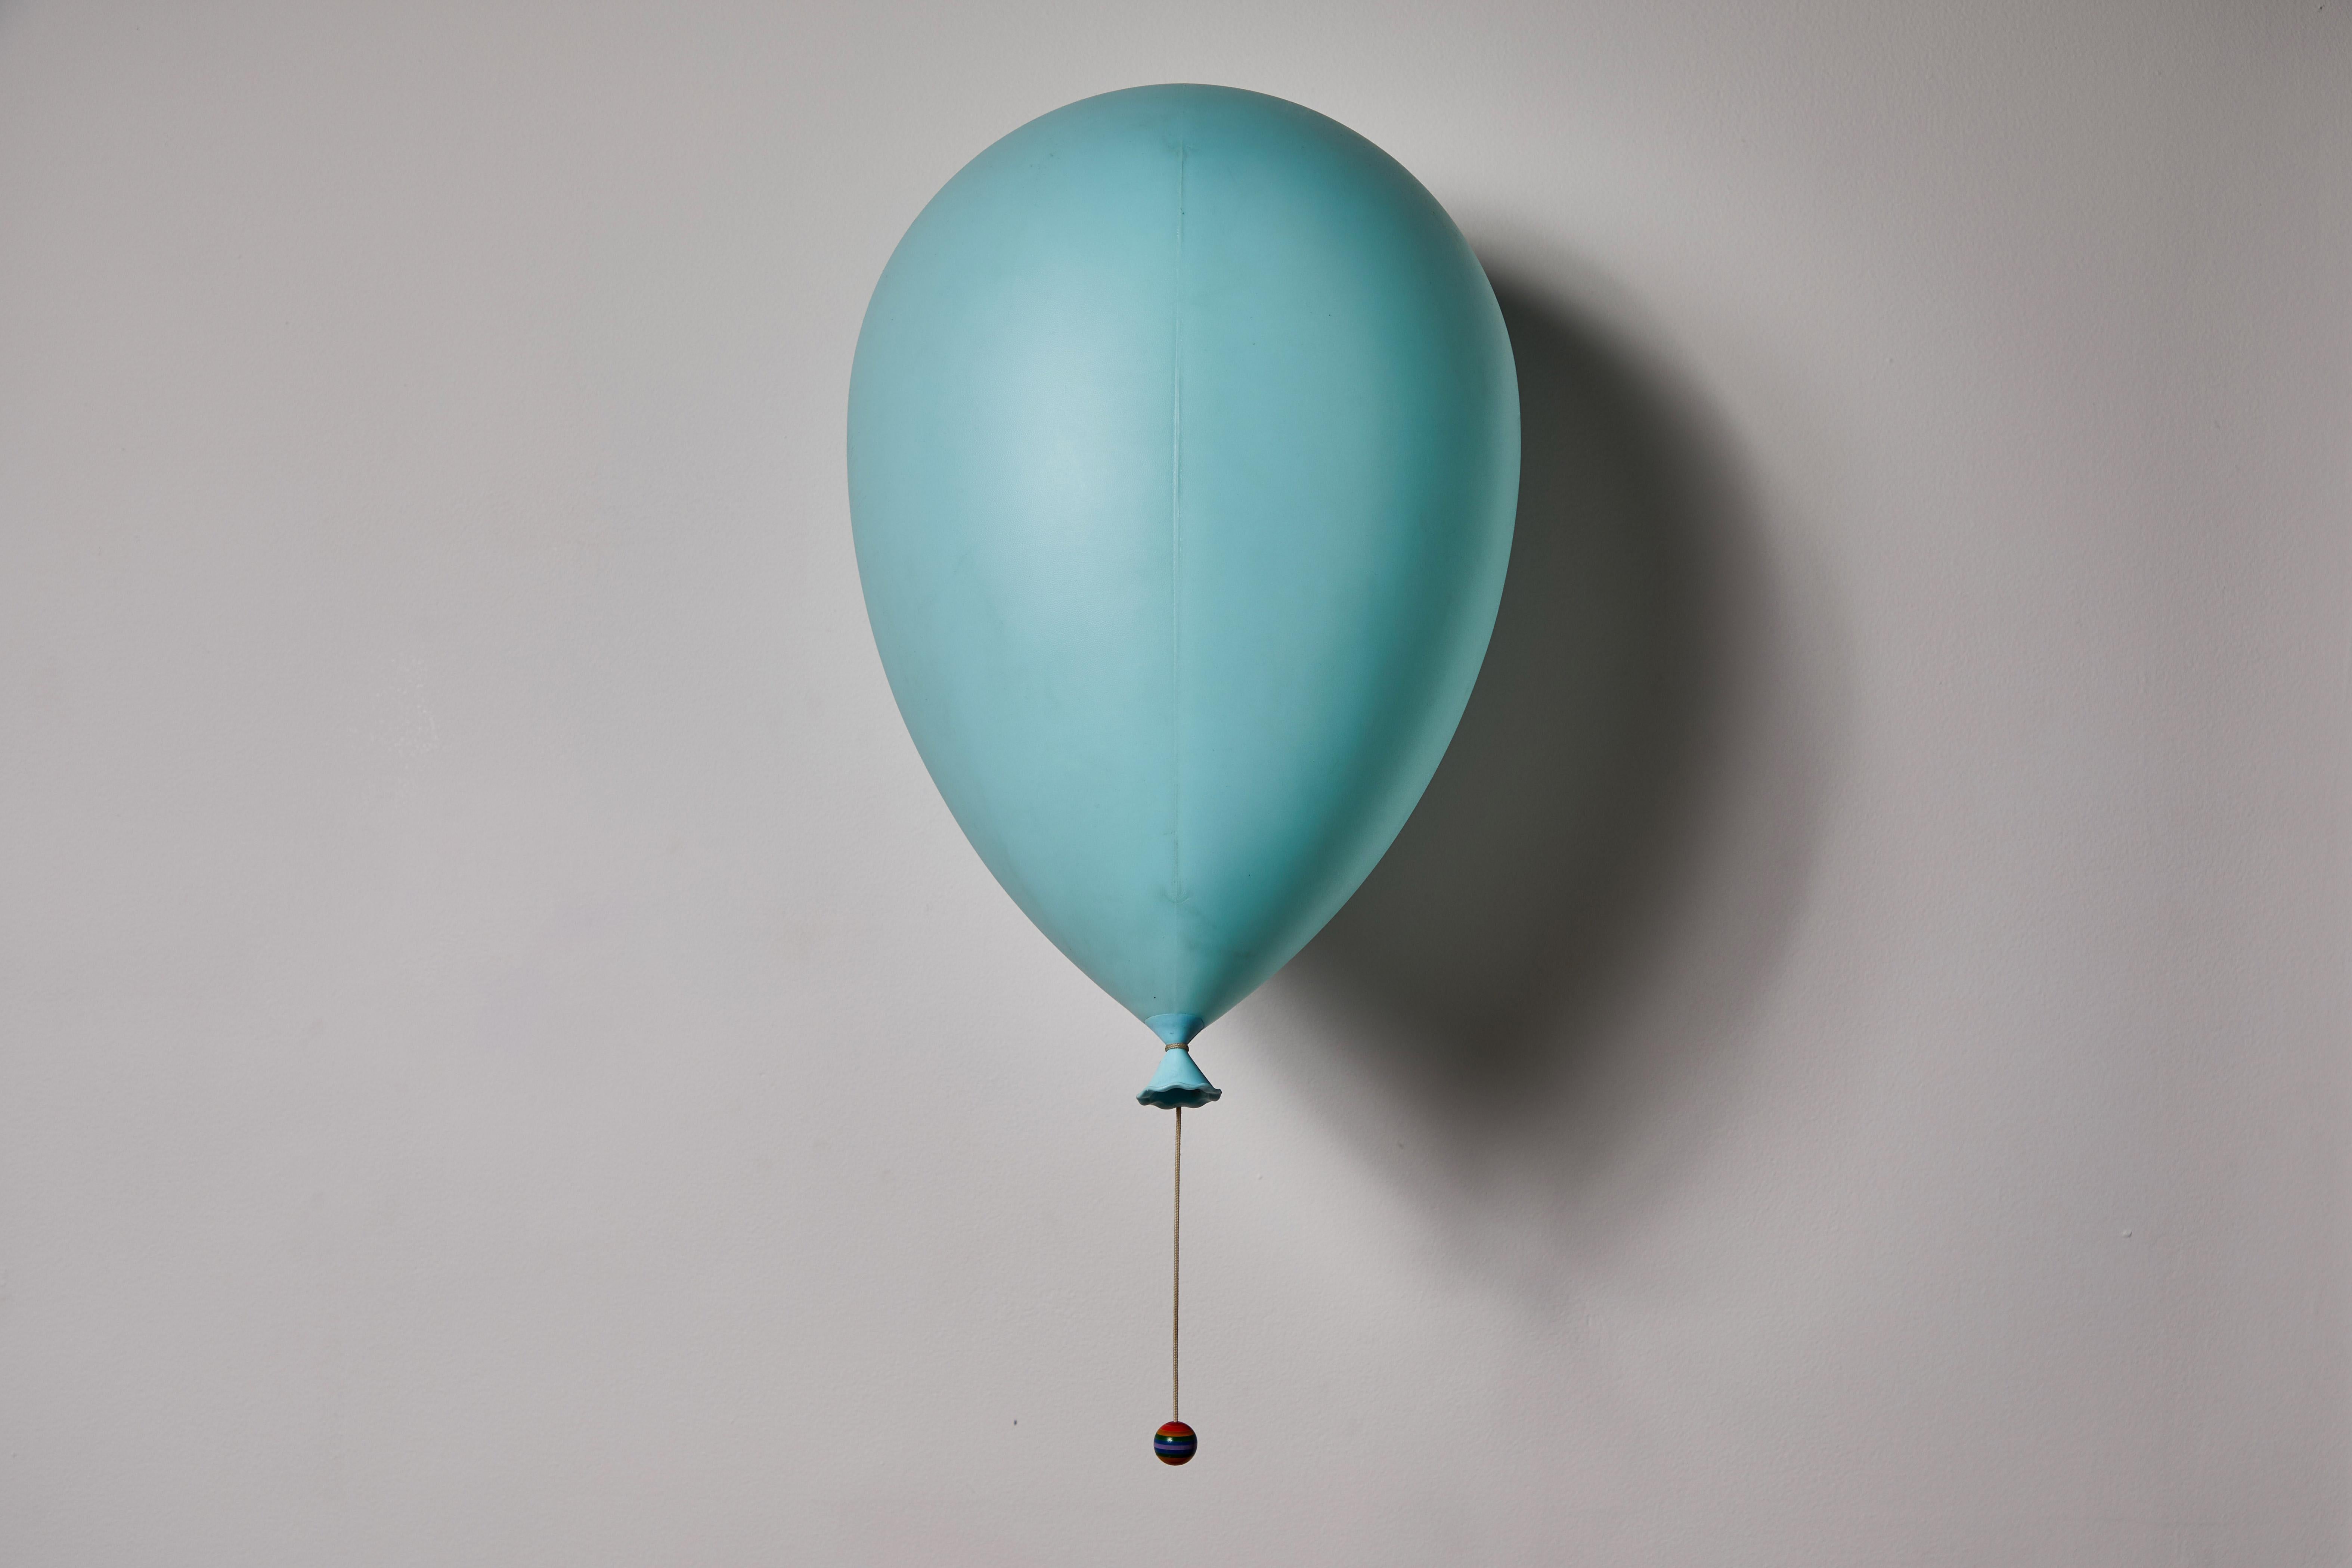 Balloon Wall/Table Lamp by Yves Christin for Bilumen. Manufactured in Italy circa 1970's. Plastic. Rewired for U.S. junction boxes. Takes one E27 40w maximum bulb. Bulb provided as a one time courtesy. Retains original makers mark.